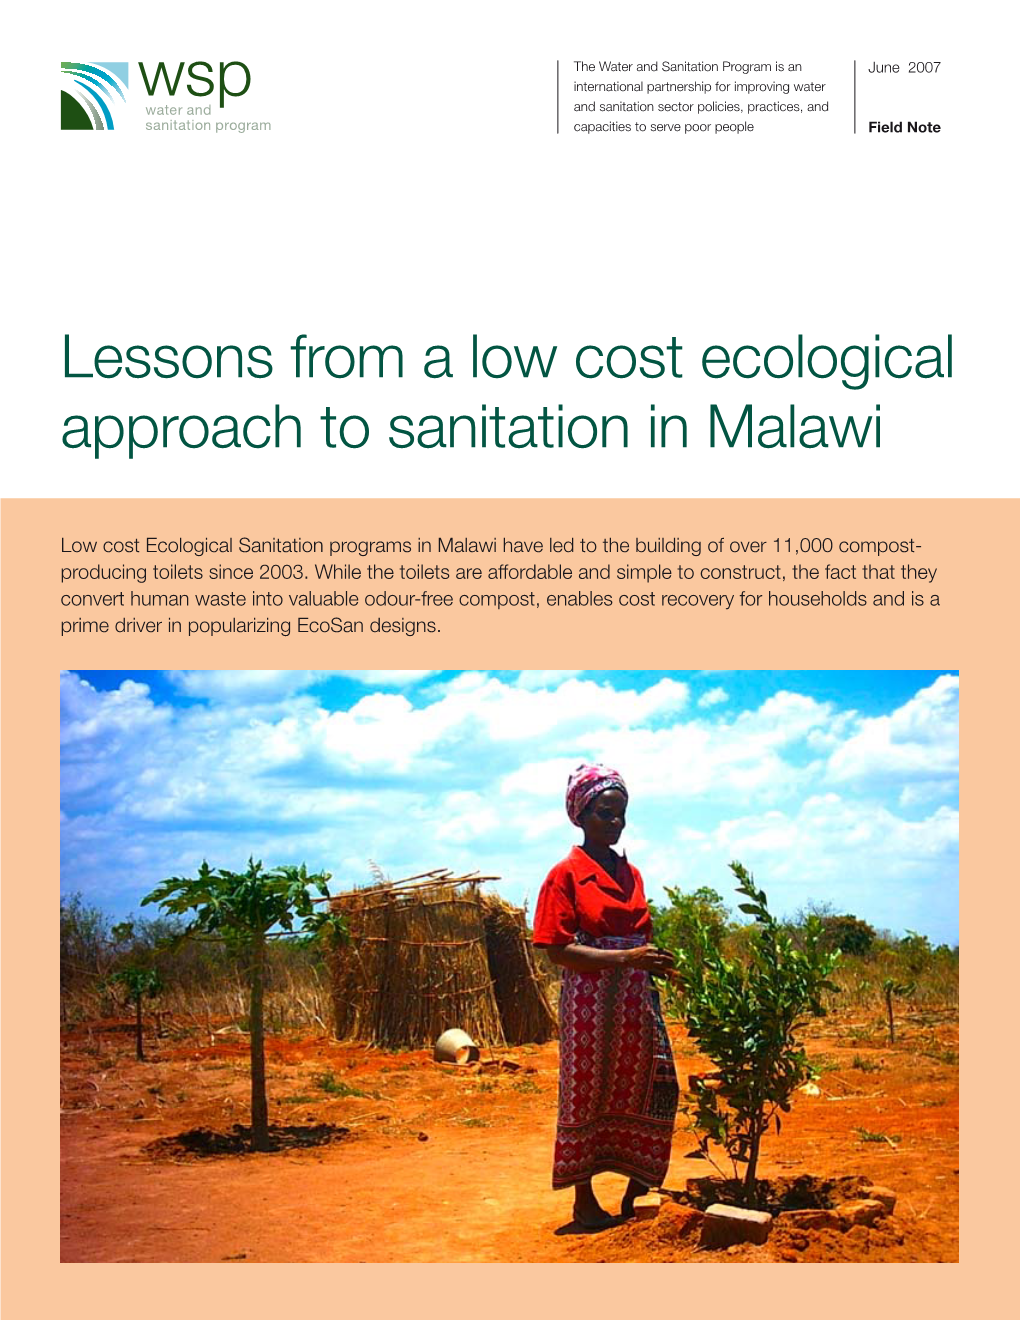 Lessons from a Low Cost Ecological Approach to Sanitation in Malawi